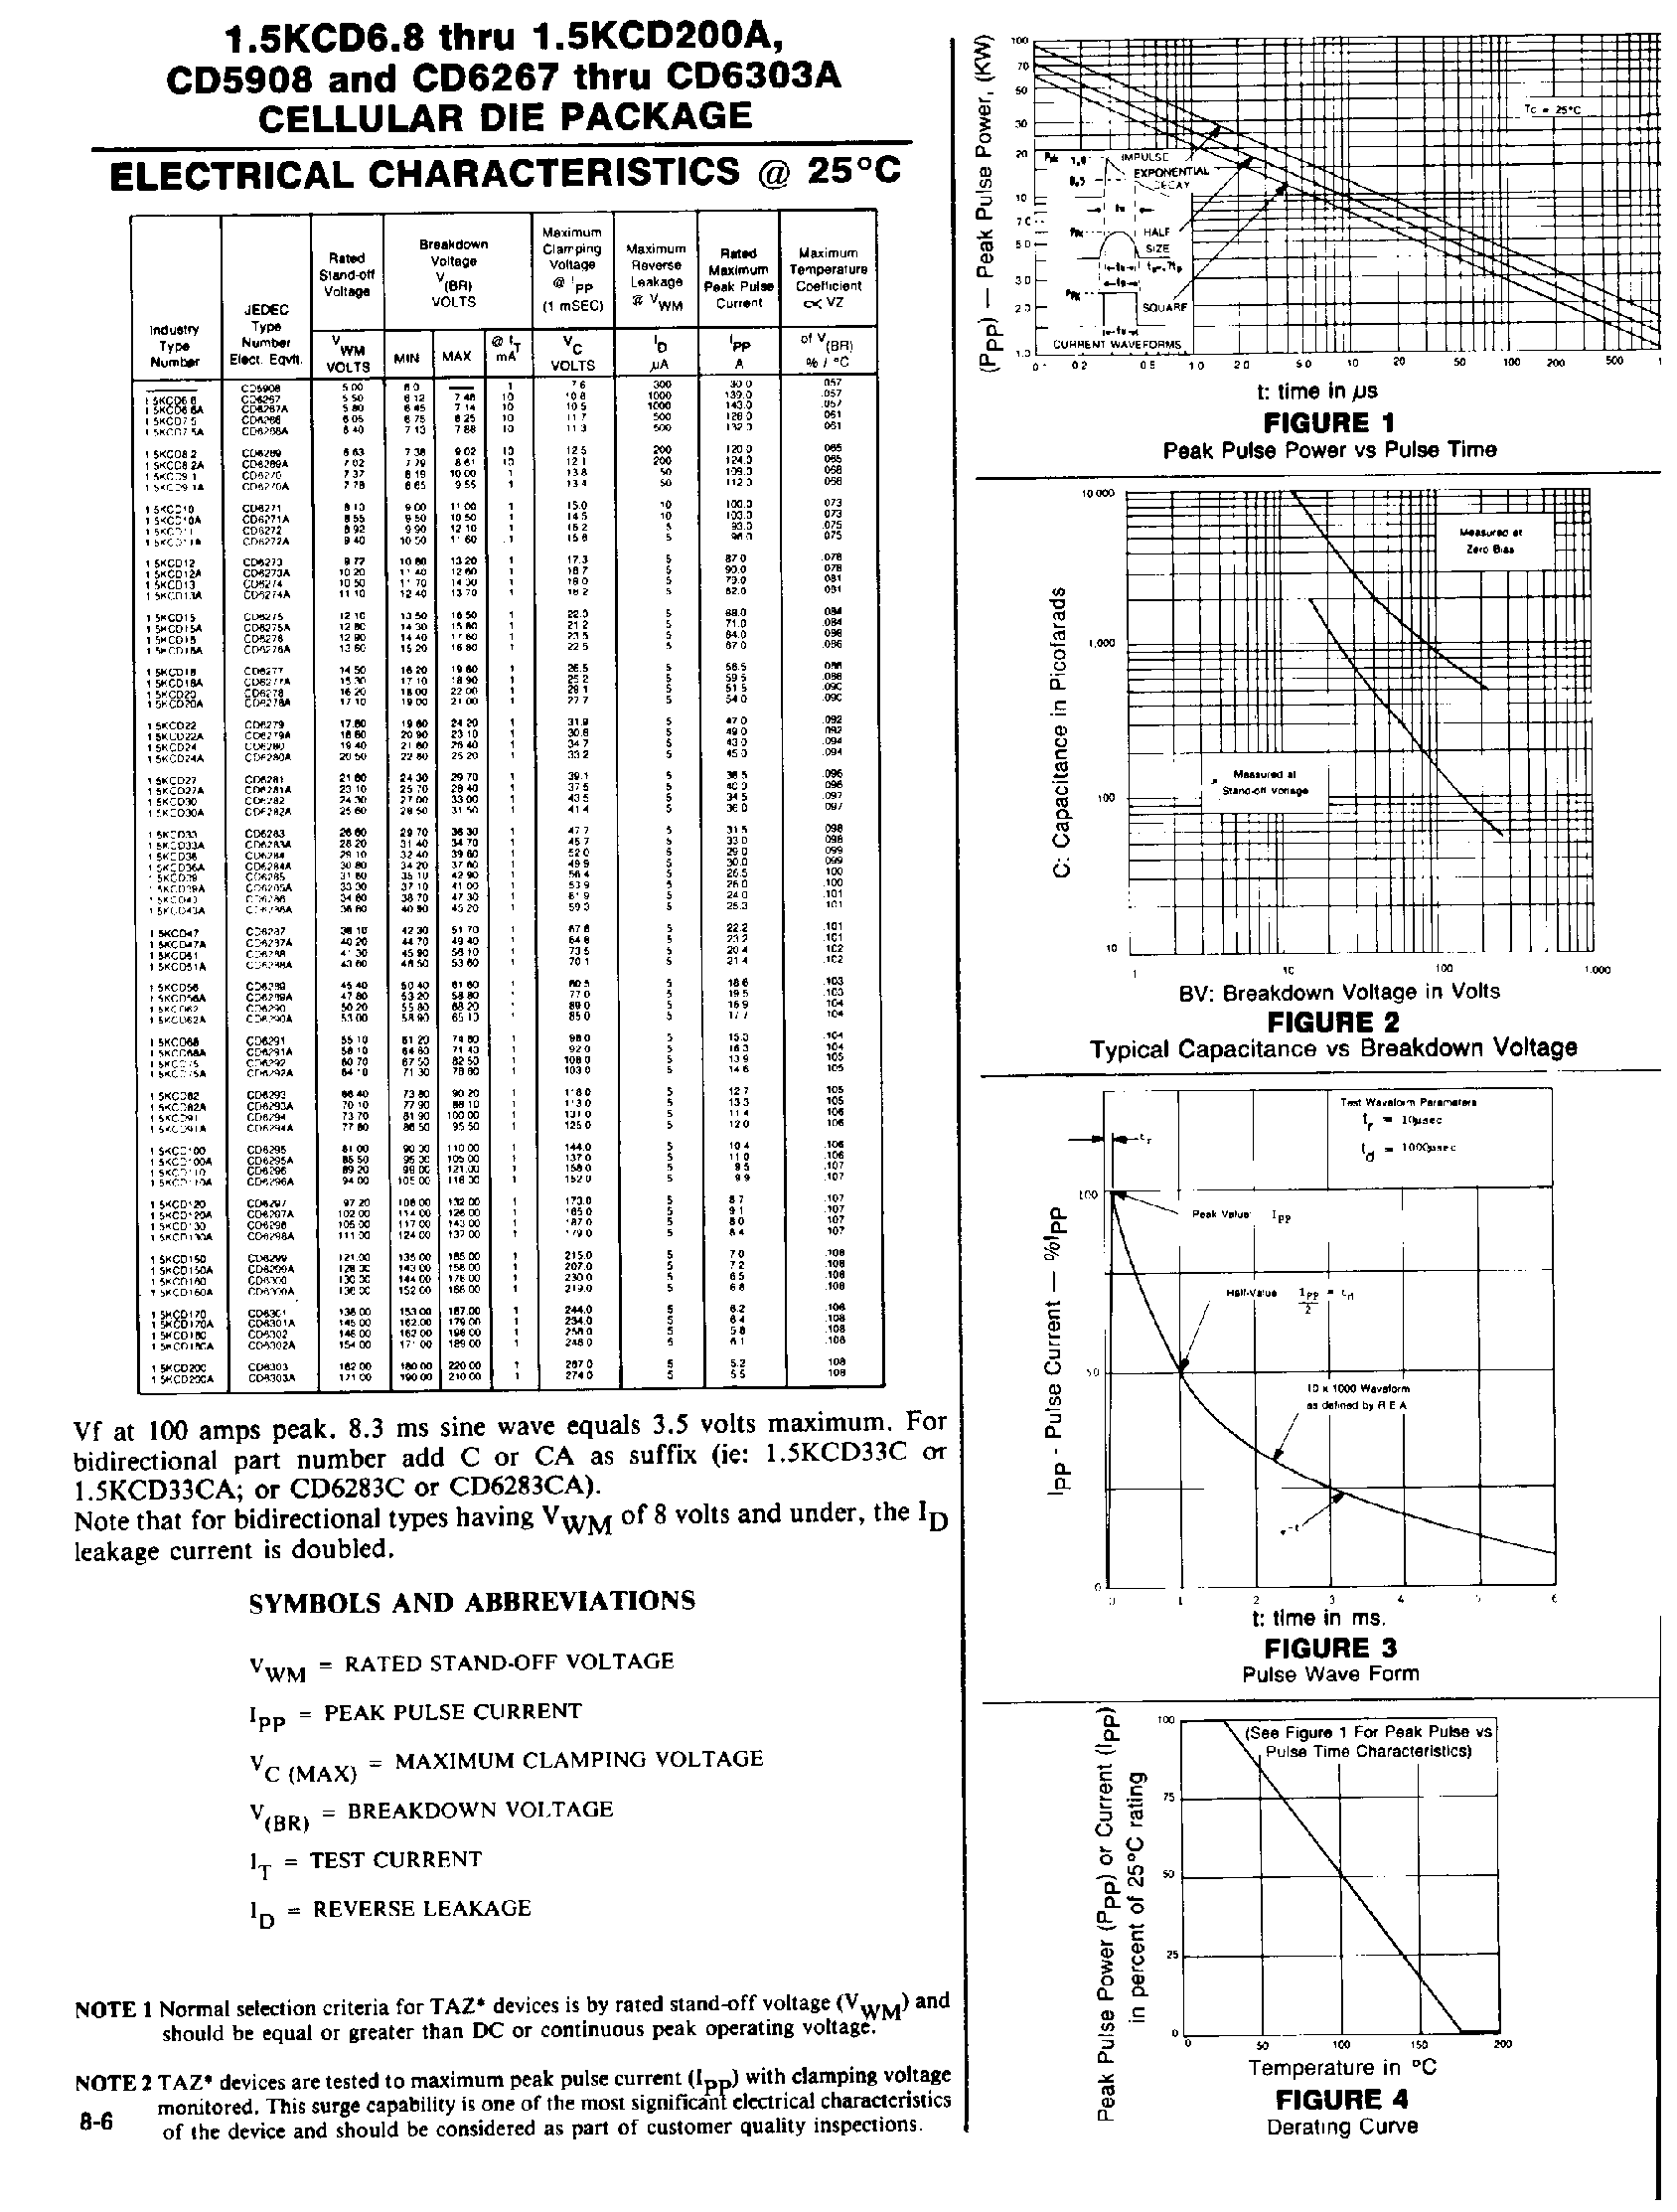 Datasheet CD6283A - Transient suppressor CELLULAR DIE PACKAGE page 2